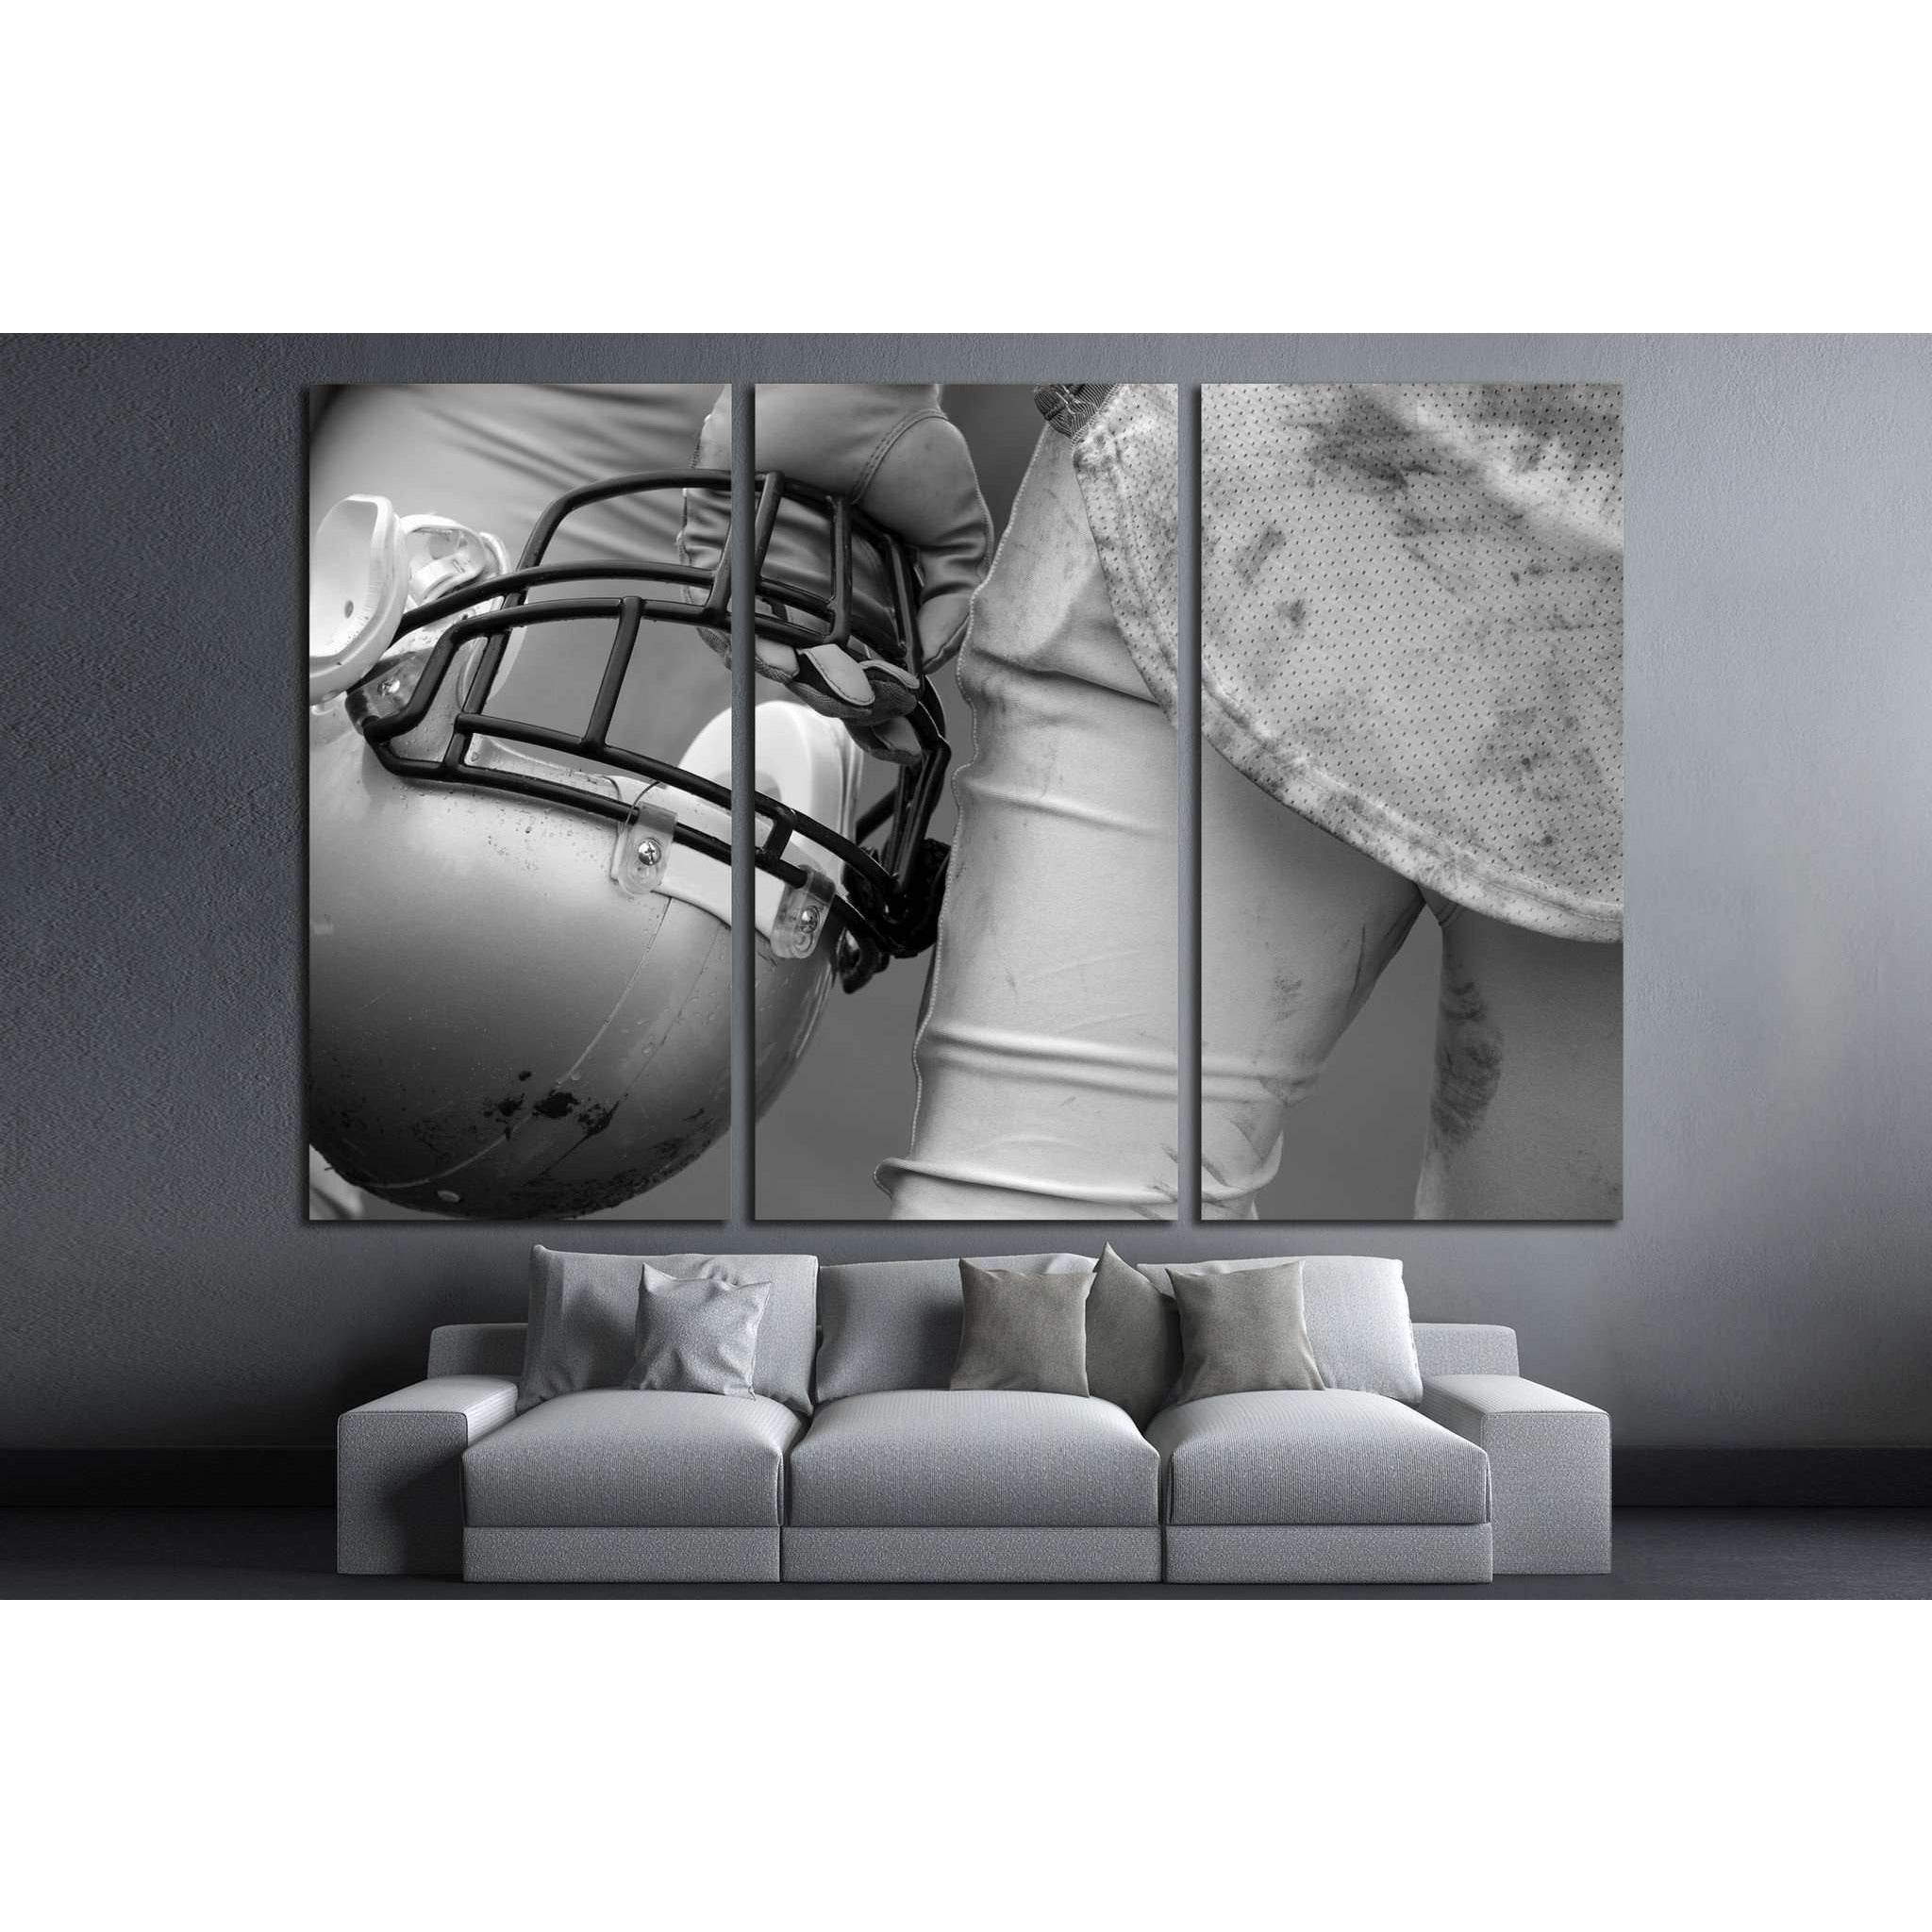 American Football Player №2111 Ready to Hang Canvas Print